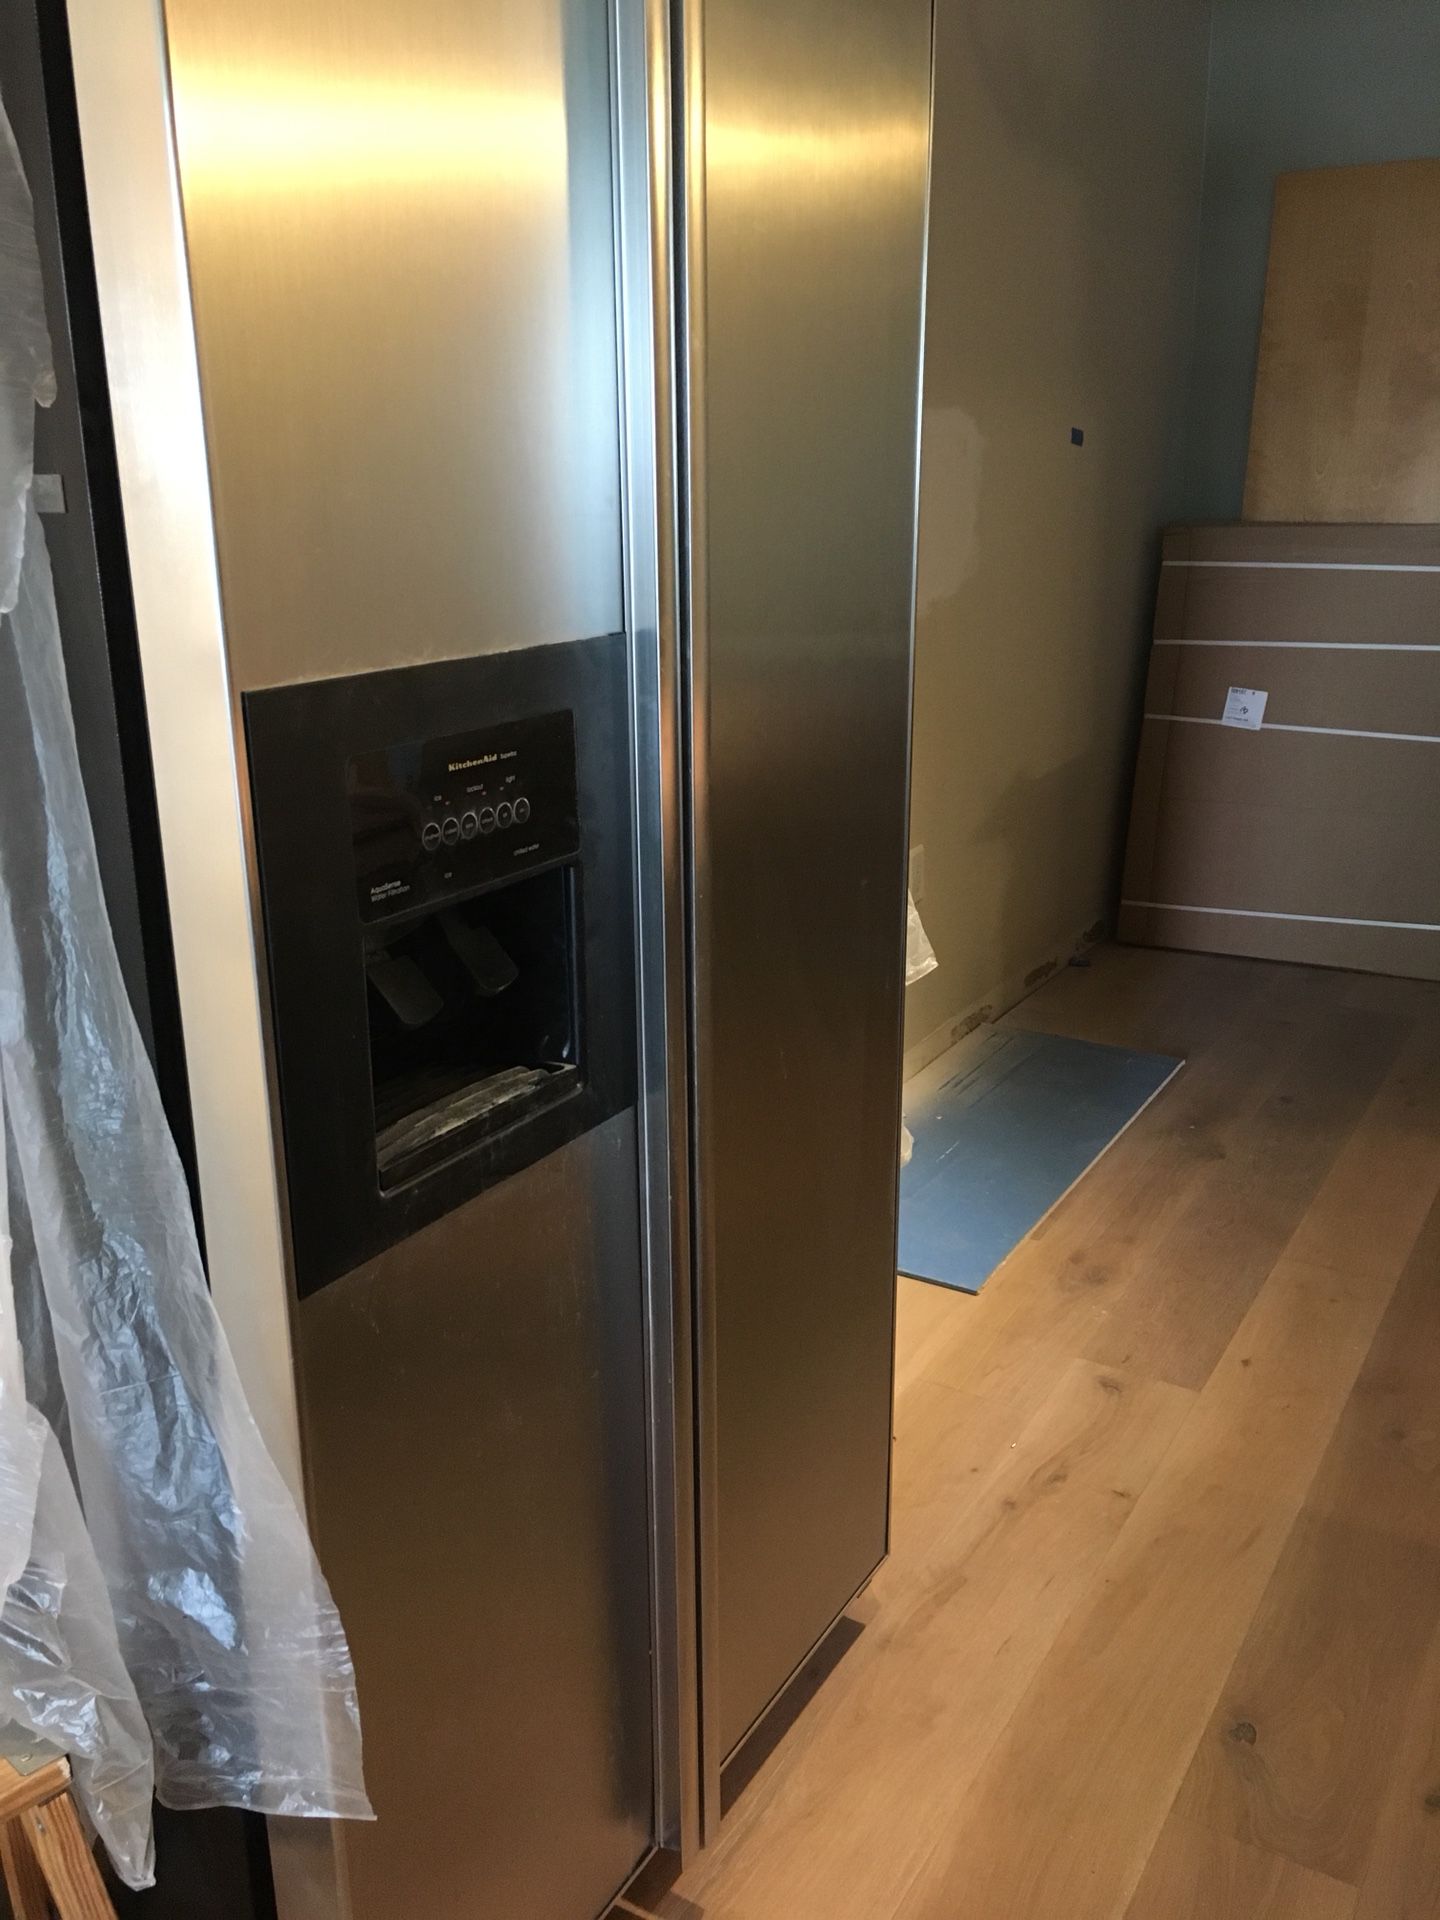 Kitchen Aid Refrigerator, Gas Stove and Dishwasher. All in good condition. Selling due to remodeling.